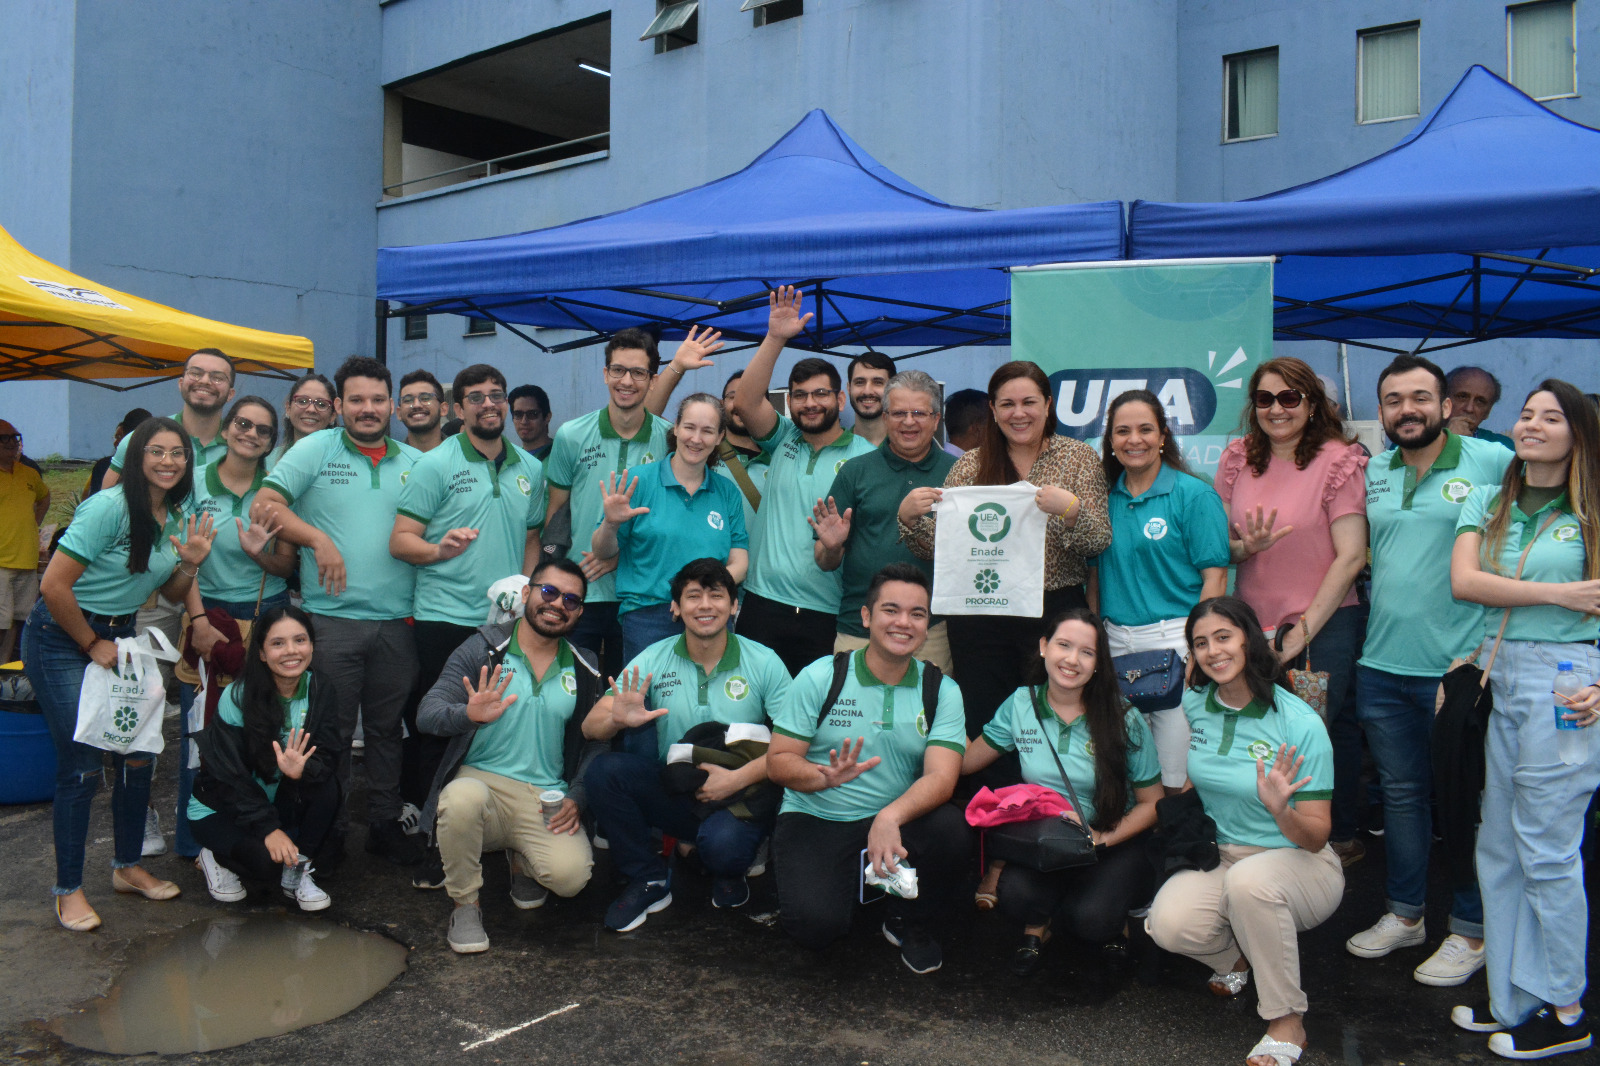 More than 300 UEA students take the Enade test in Manaus